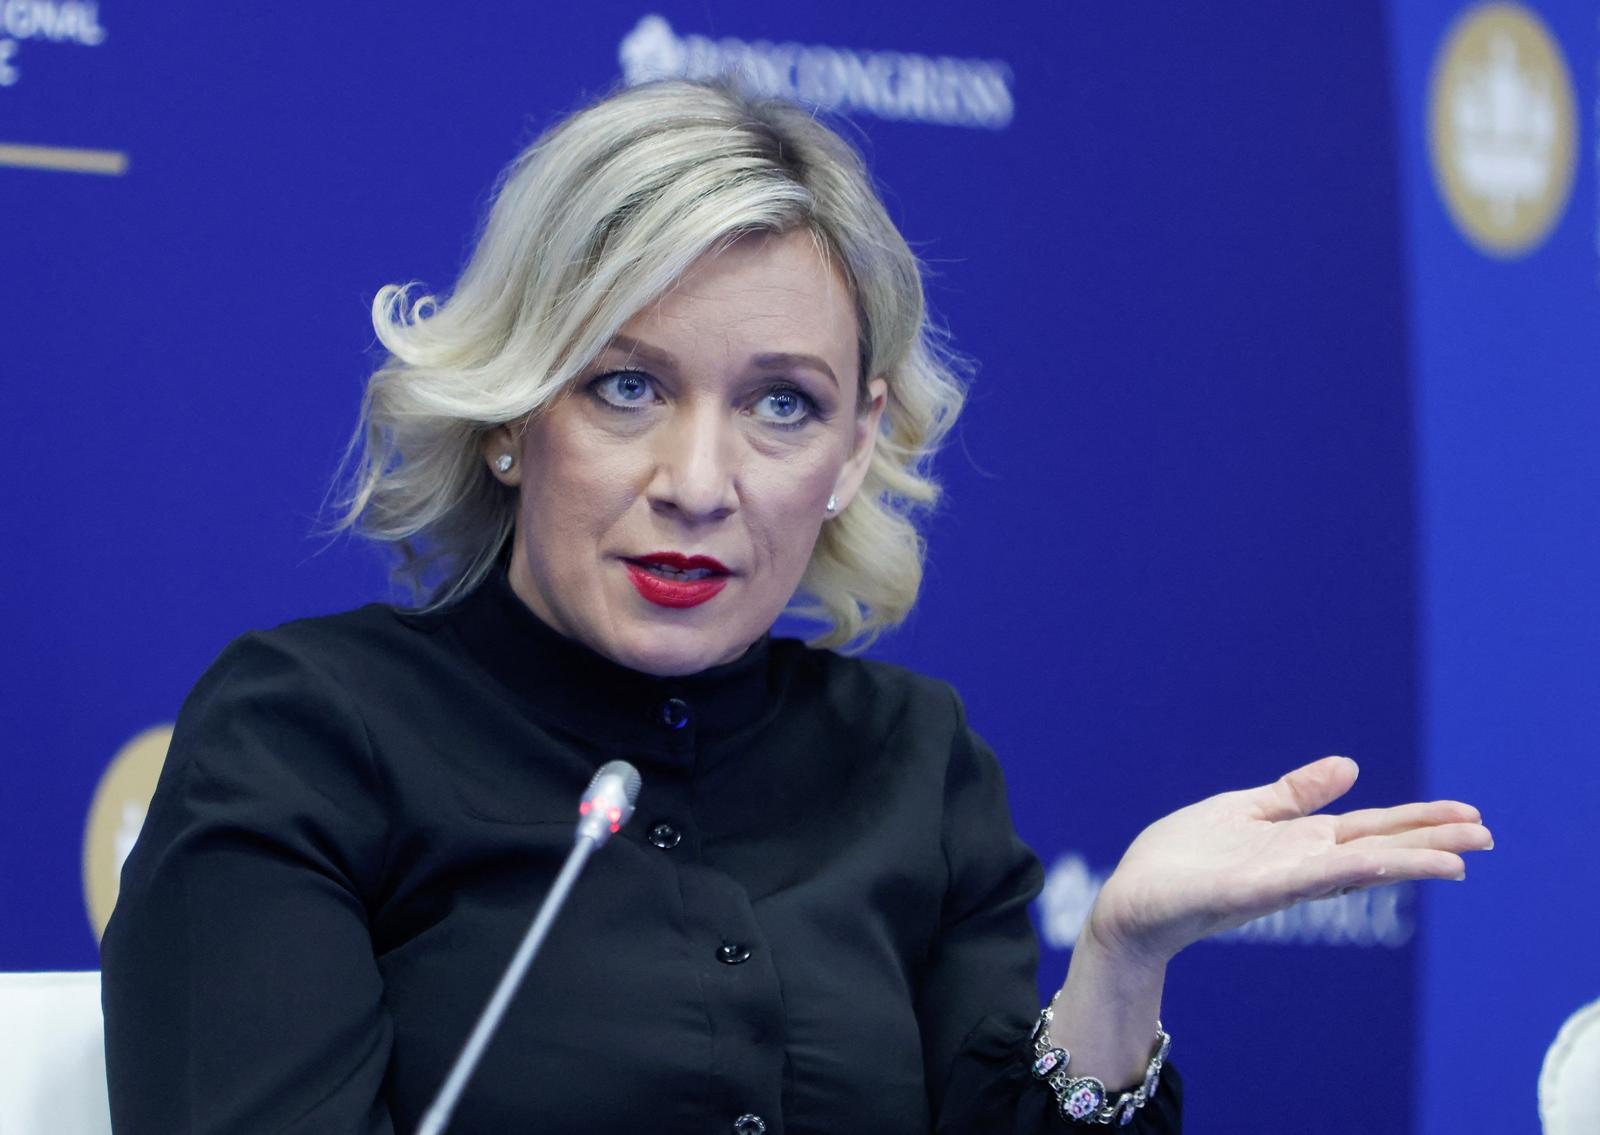 Russia's Foreign Ministry spokeswoman Maria Zakharova speaks during a session of the St. Petersburg International Economic Forum (SPIEF) in Saint Petersburg, Russia June 16, 2022. REUTERS/Maxim Shemetov Photo: MAXIM SHEMETOV/REUTERS